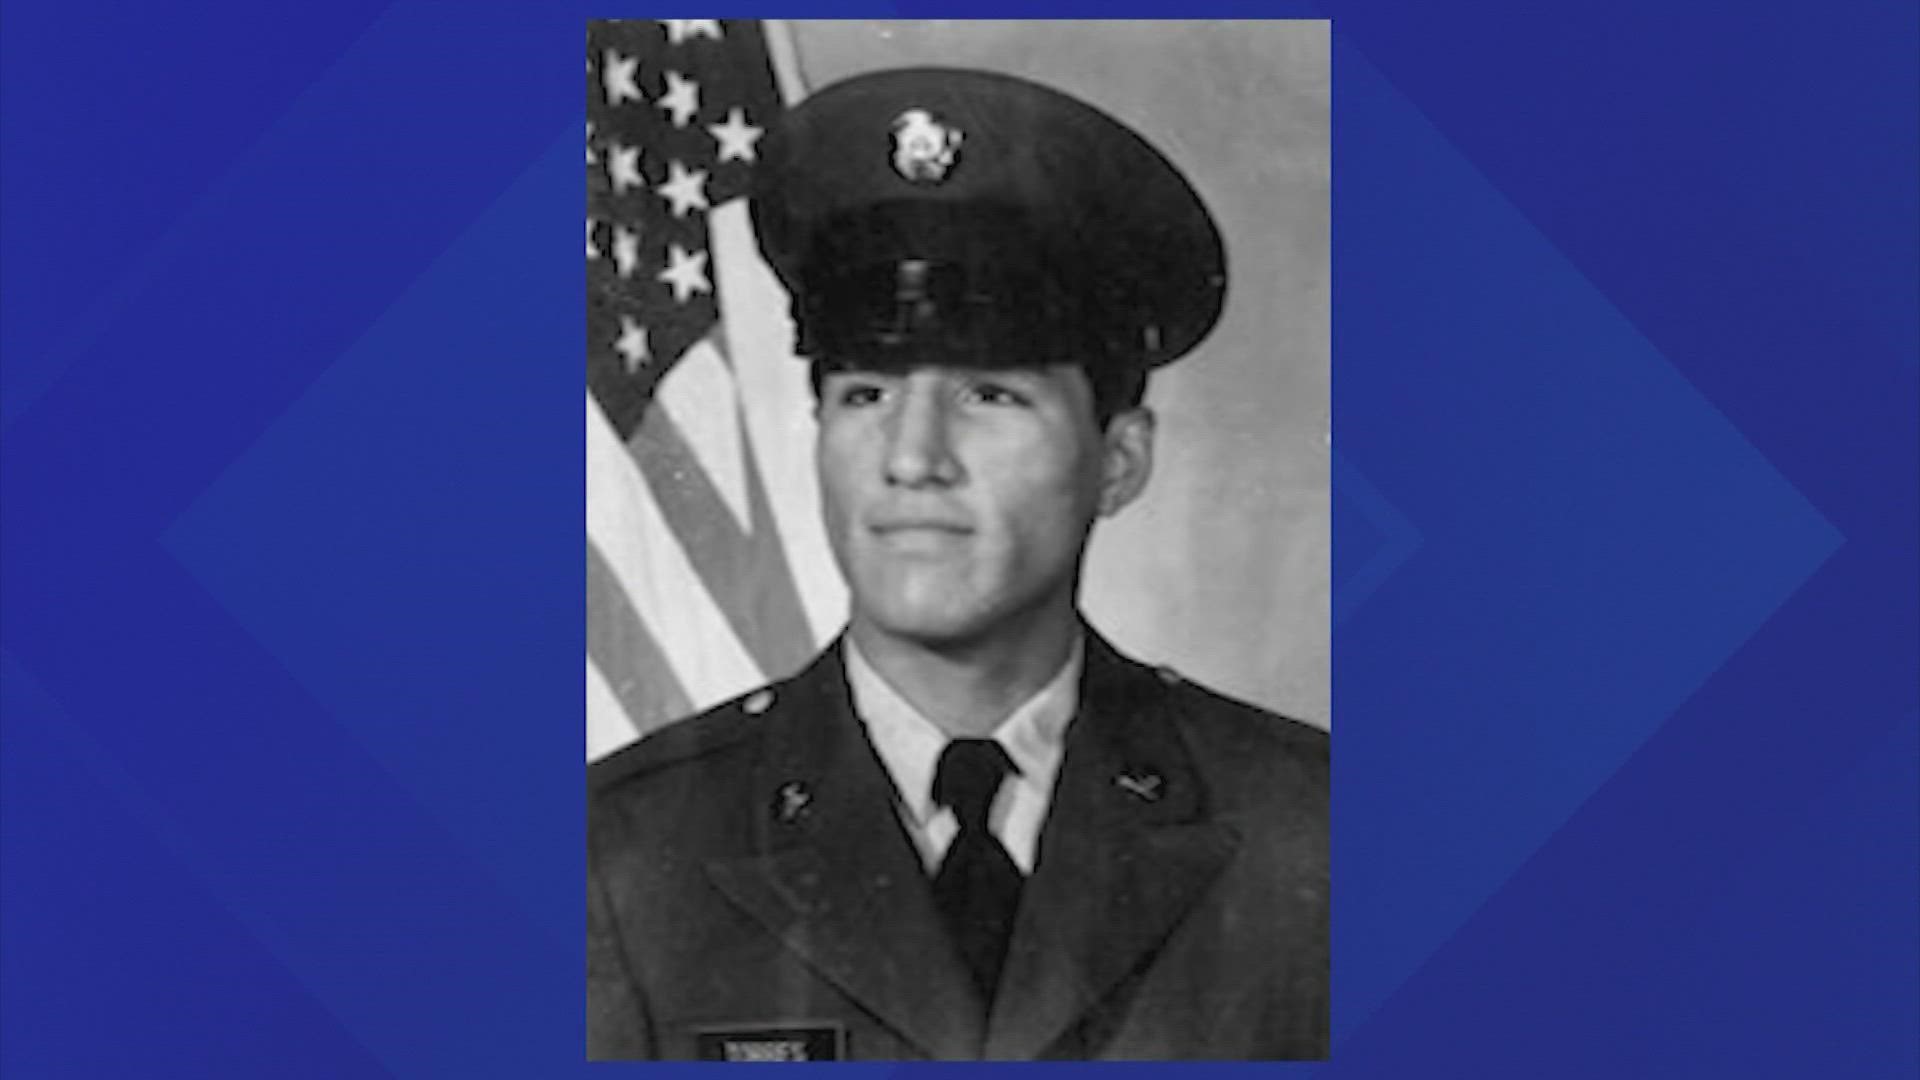 Vietnam veteran Joe Campos Torres was beaten and killed by Houston police in 1977 after being arrested for disorderly conduct.